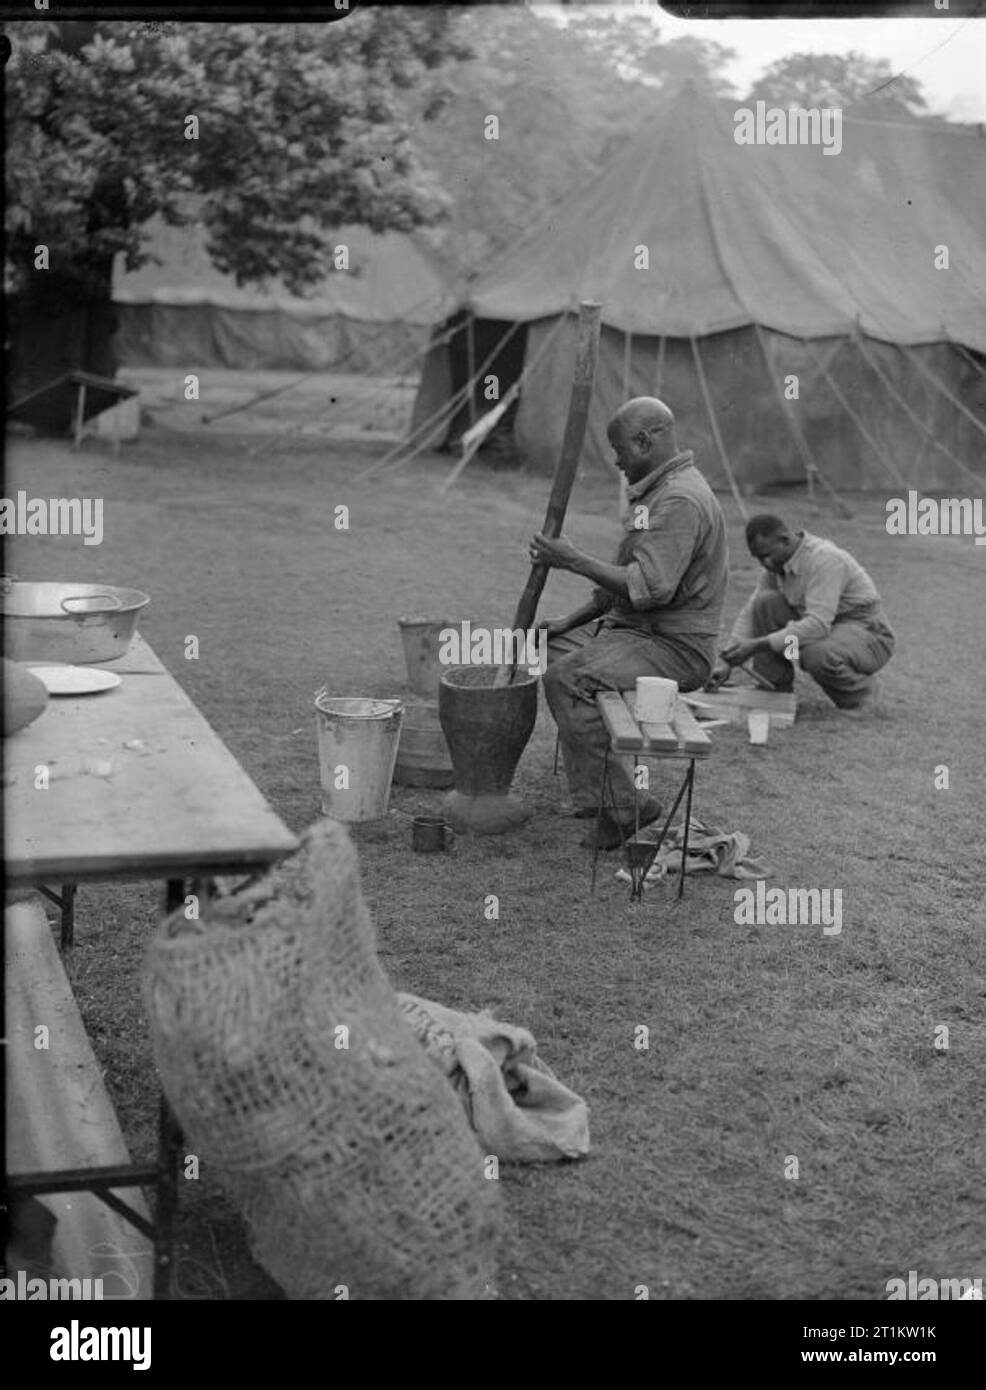 Victory Marchers Camp in London- Accommodation in Kensington Gardens, London, England, UK, 1946 A West African cook prepares a meal in front of the tented camp in Kensington Gardens, London. Men of several African regiments are amongst thousands of troops from across the Empire who will take part in the Victory Parade. Stock Photo